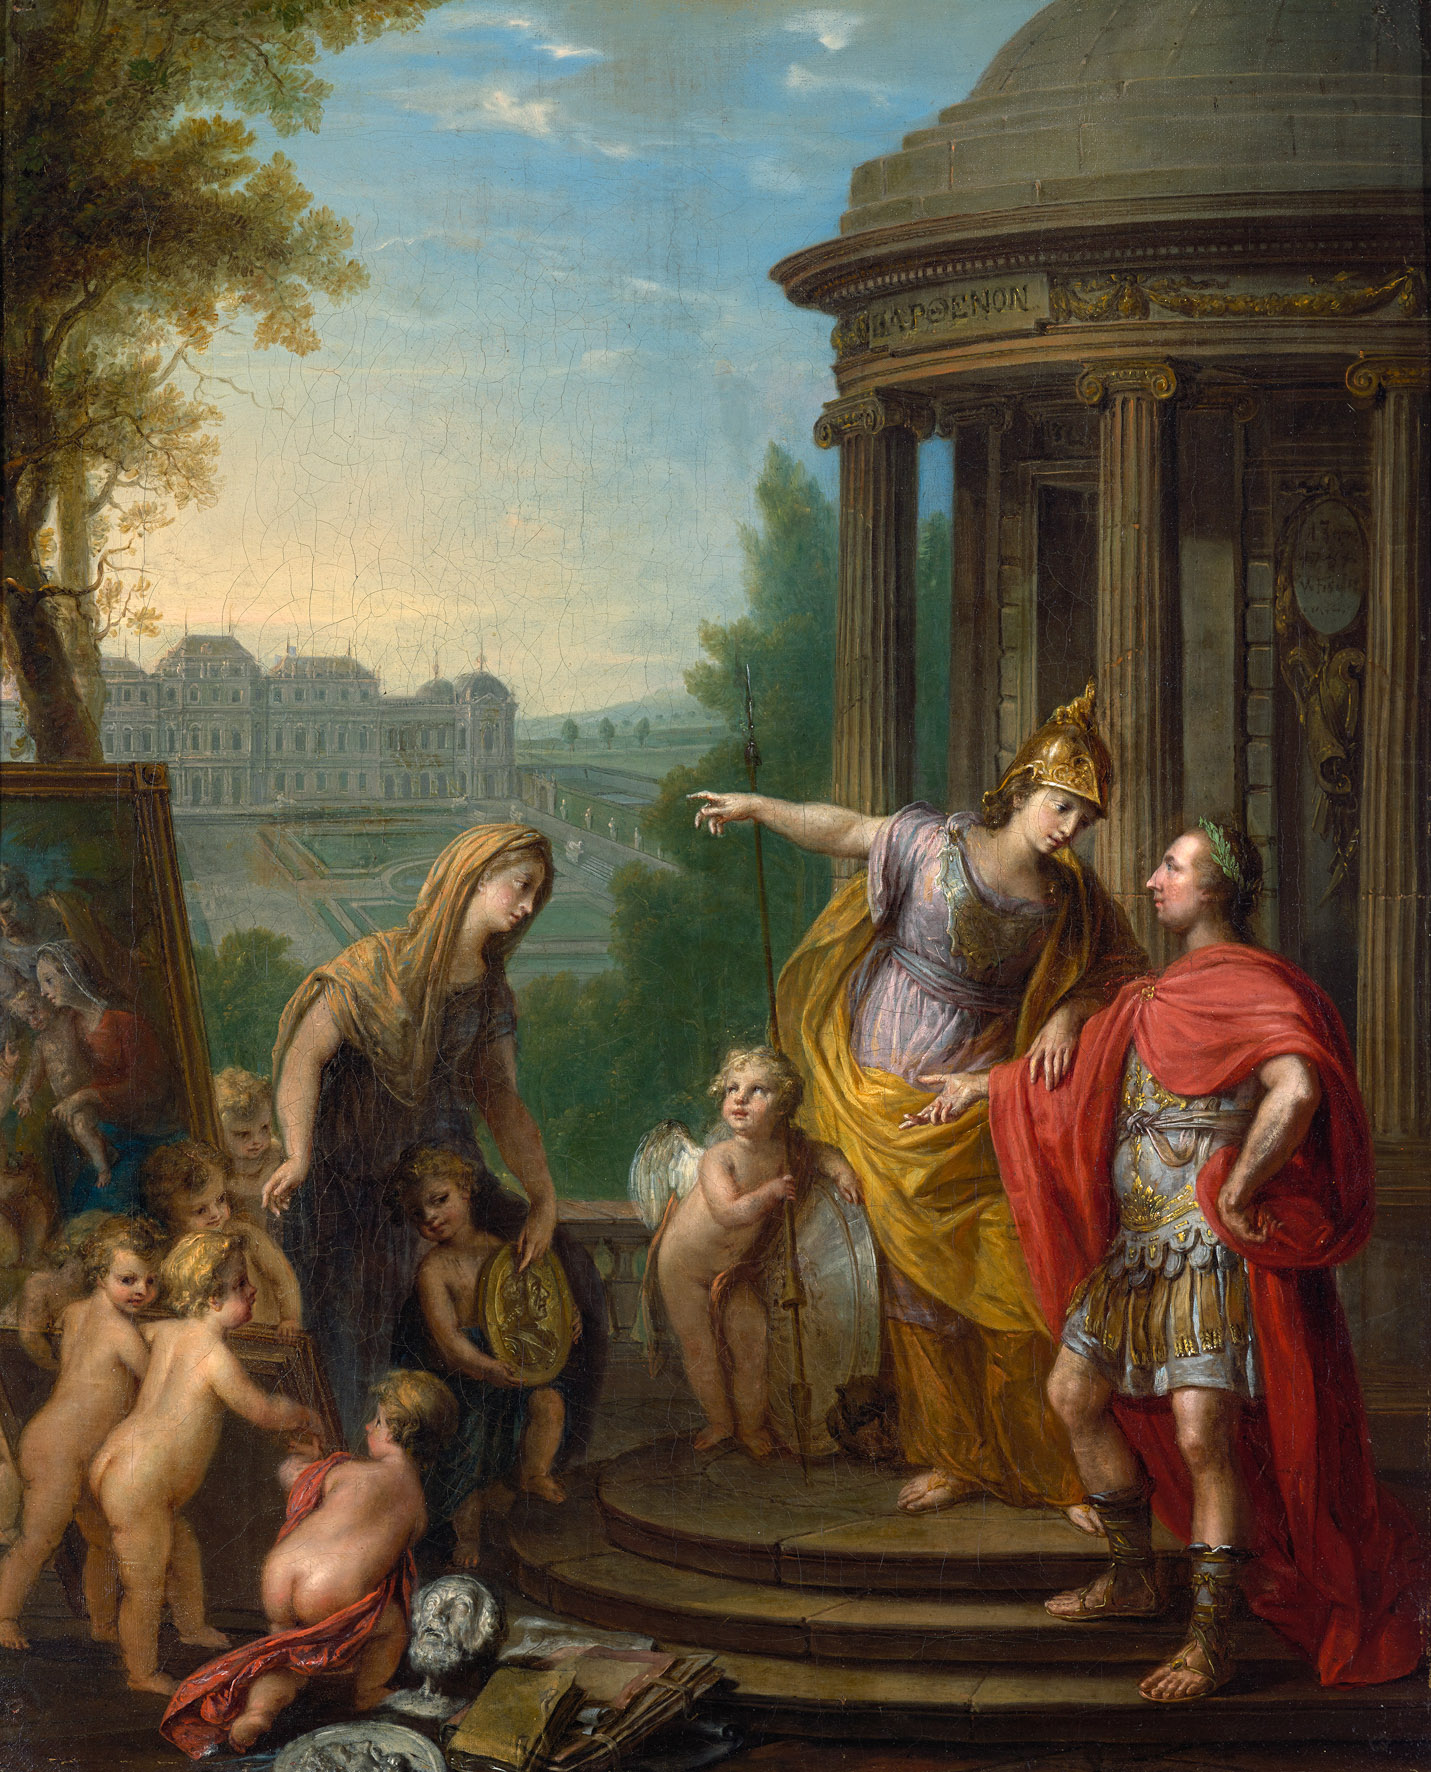 Vinzenz Fischer: Allegory of the Transfer of the Imperial Gallery to the Belvedere, 1781